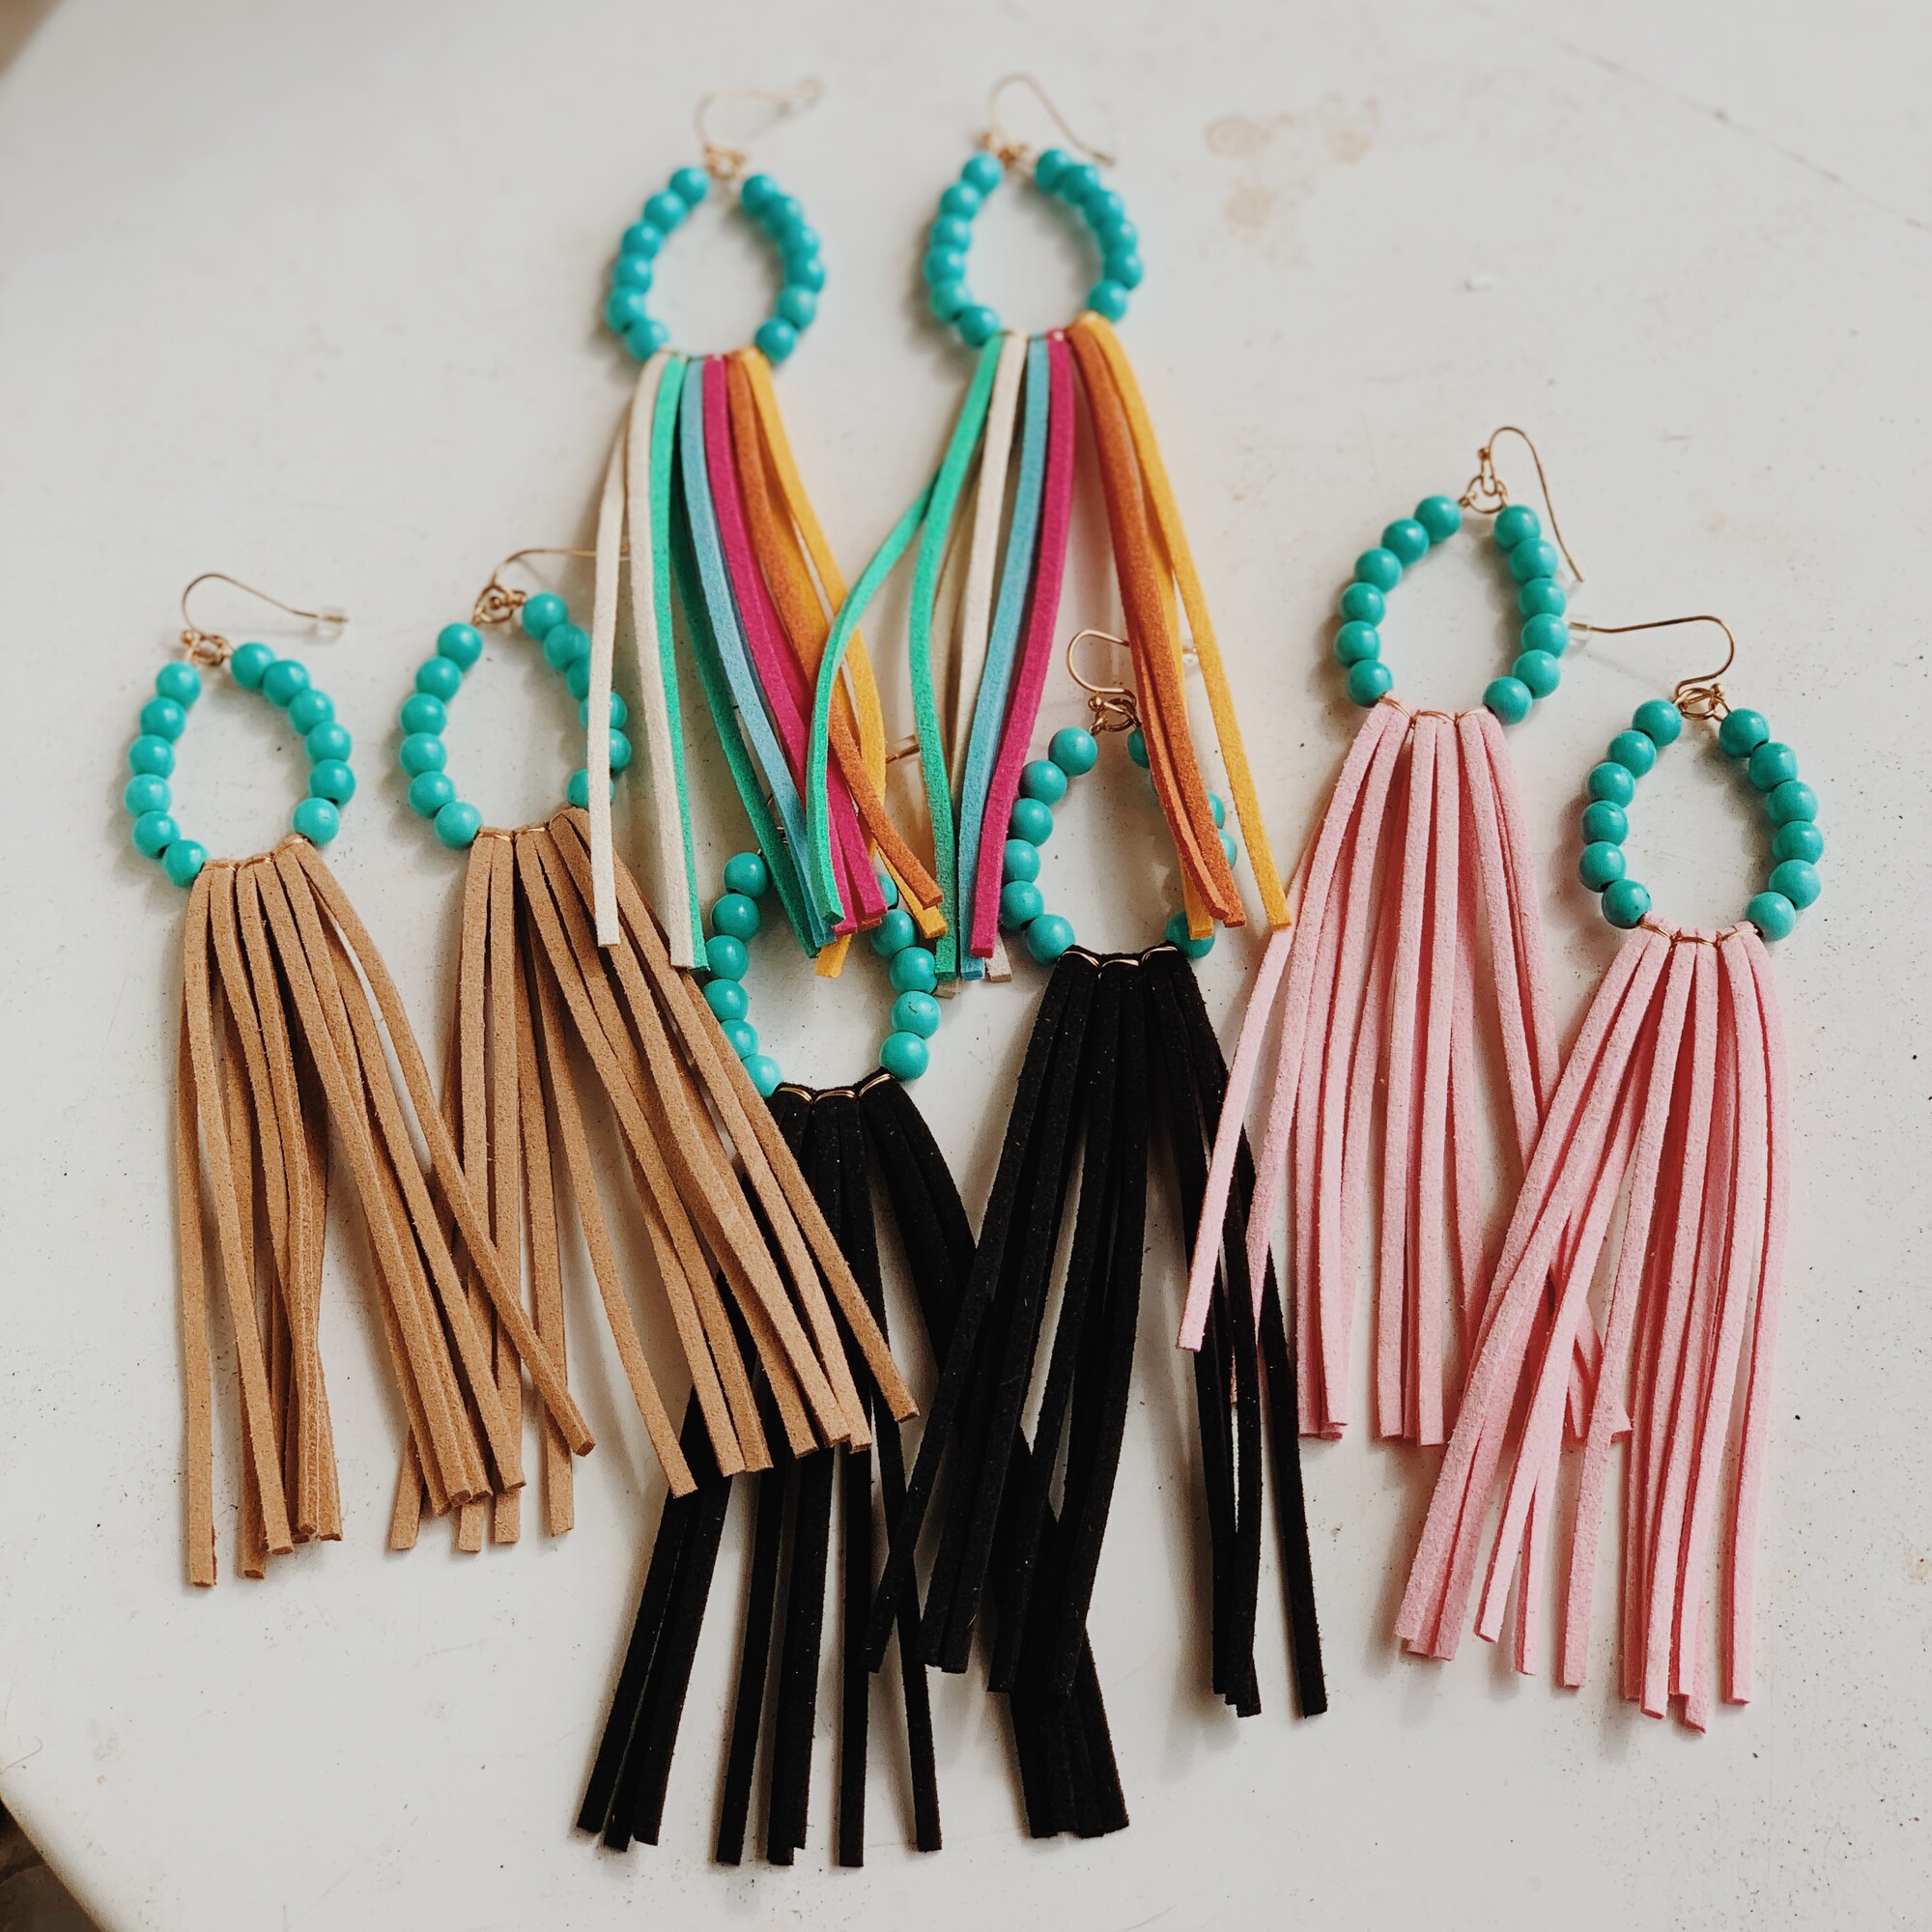 These beautiful tassel earrings are available in pink, tan, rainbow, or black! They measure 5 inches in length.